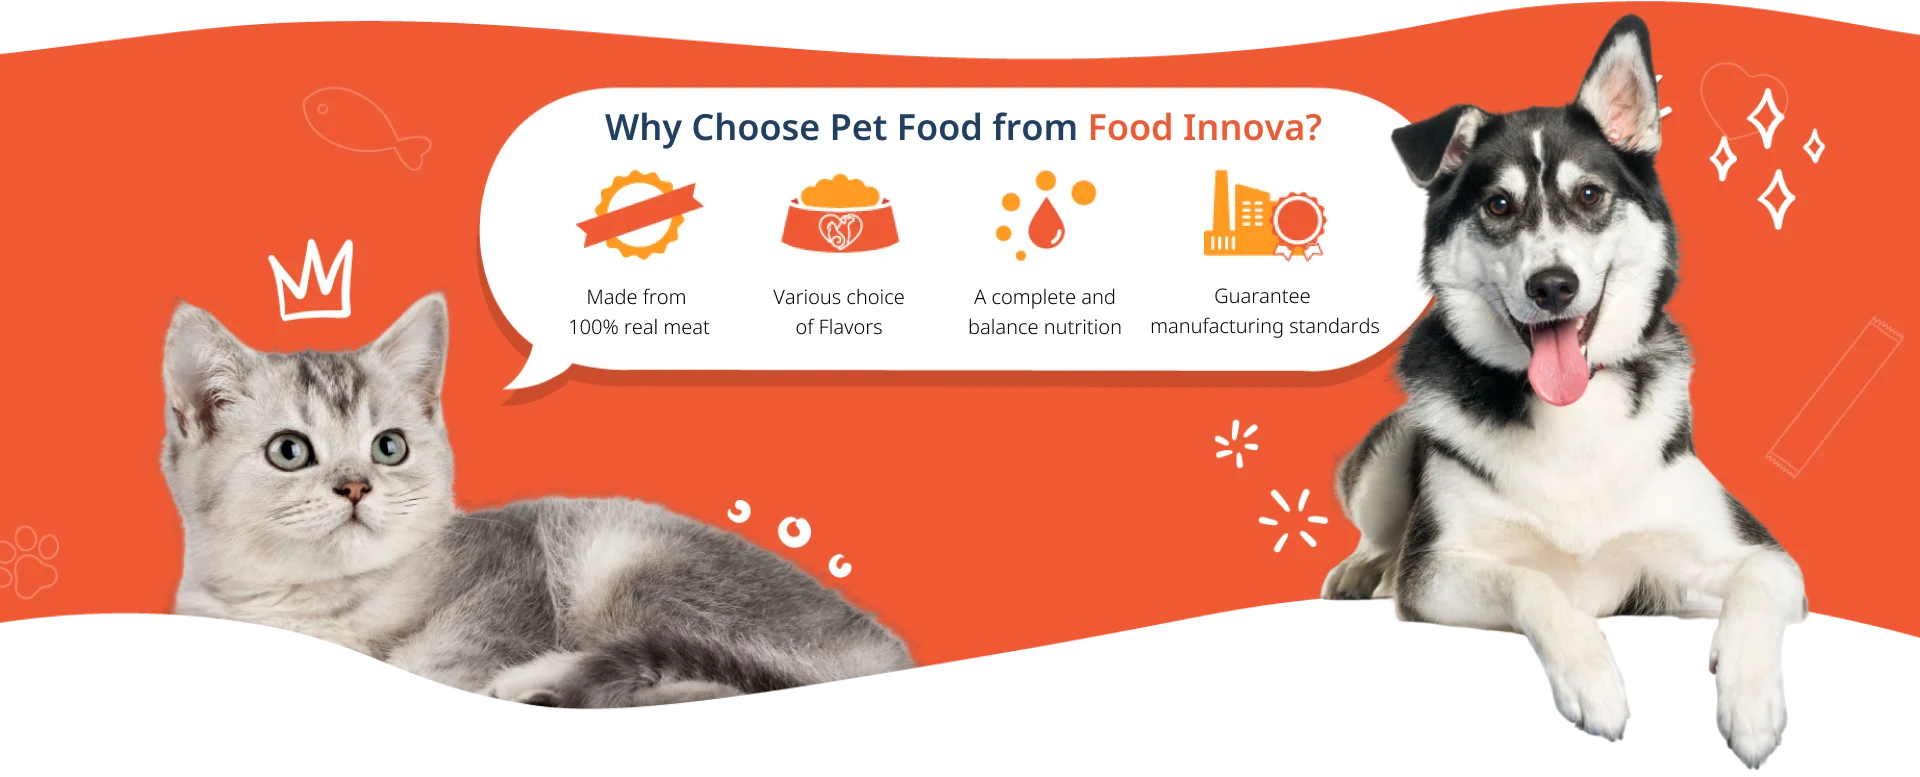 Why Choose Pet Food from Food Innova